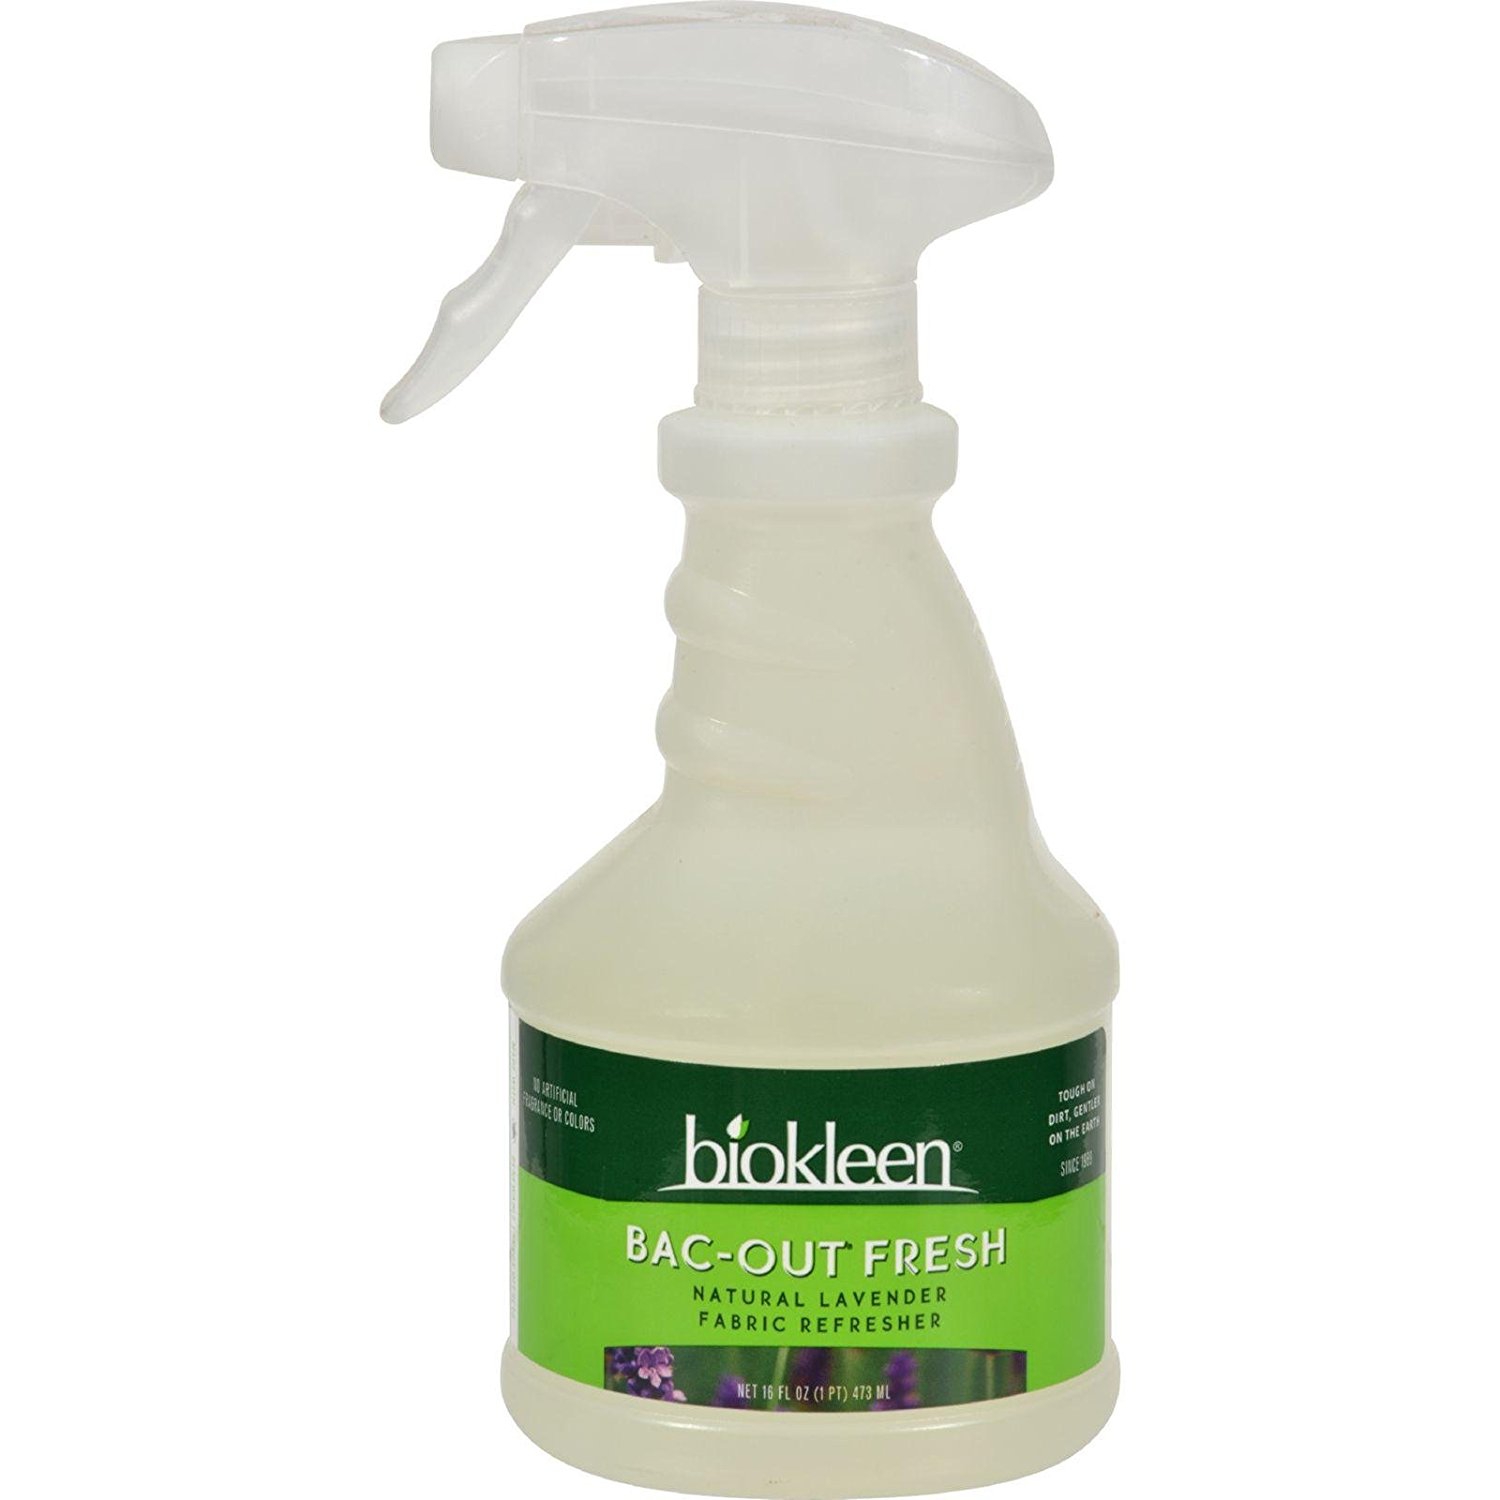 Biokleen Bac-Out Natural Fabric Refresher - Fresh Lavender - 16 oz - image 1 of 3